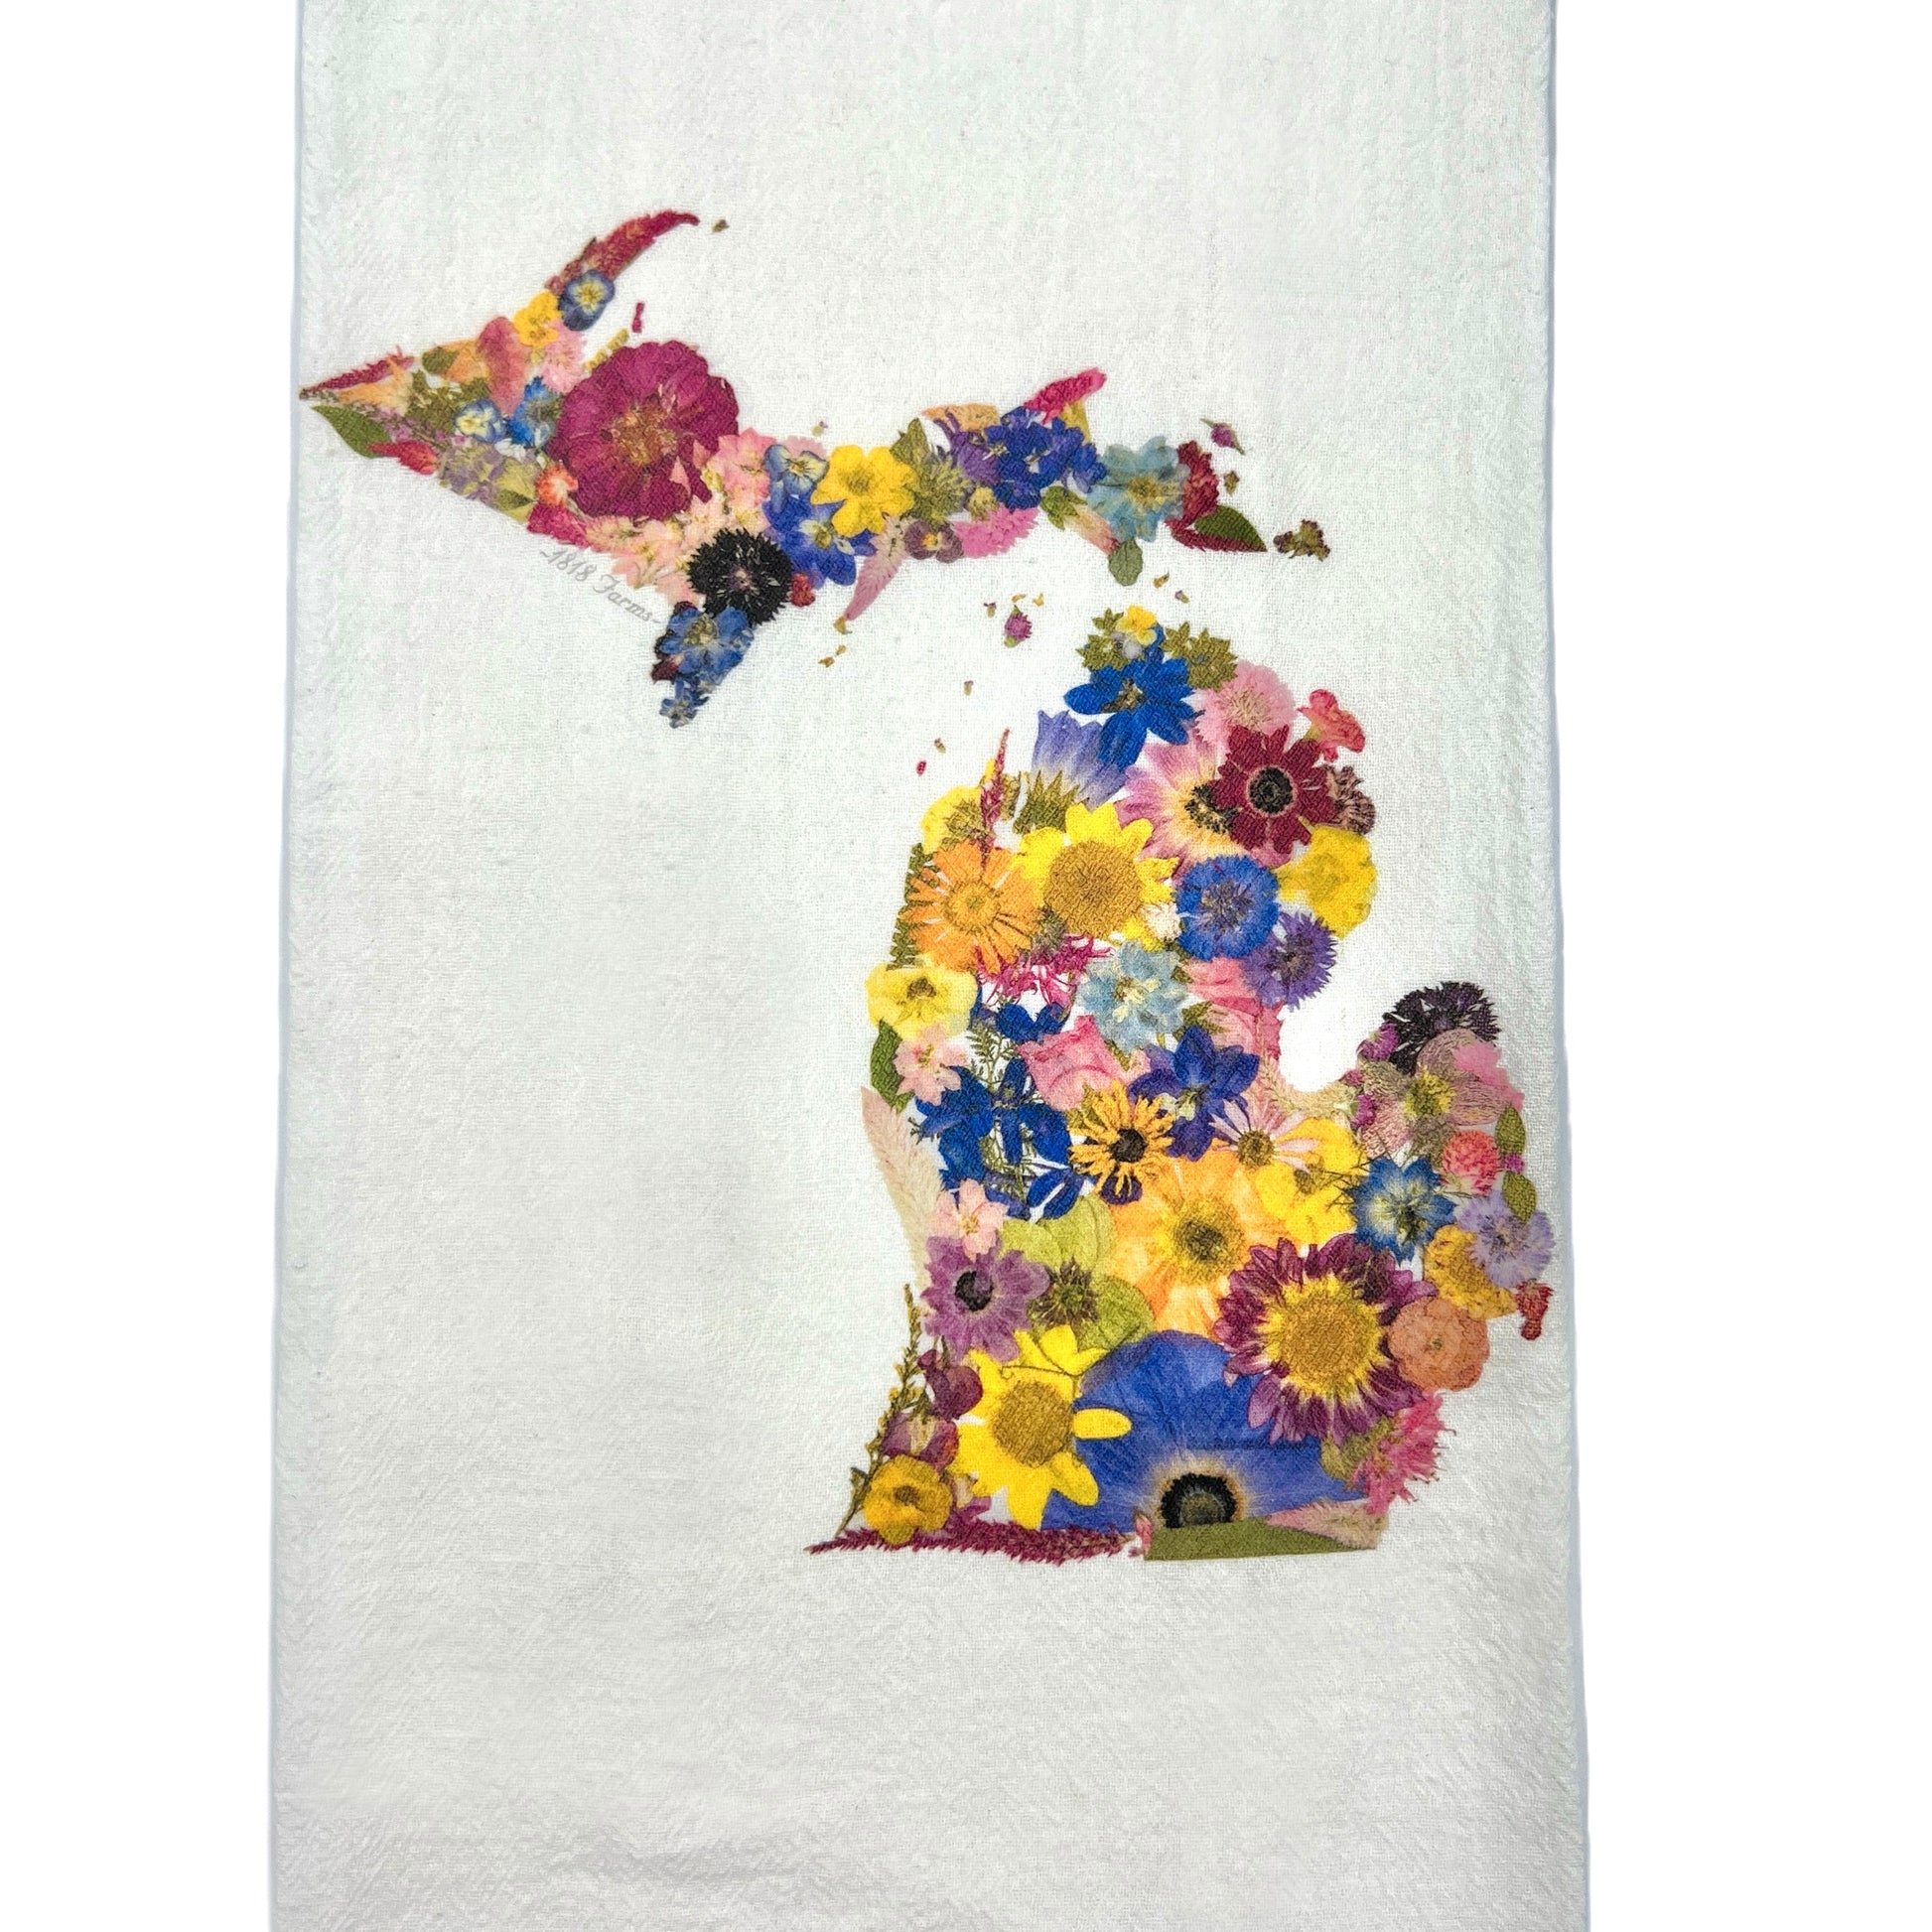 Michigan Themed Flour Sack Towel  - "Where I Bloom" Collection Towel 1818 Farms   